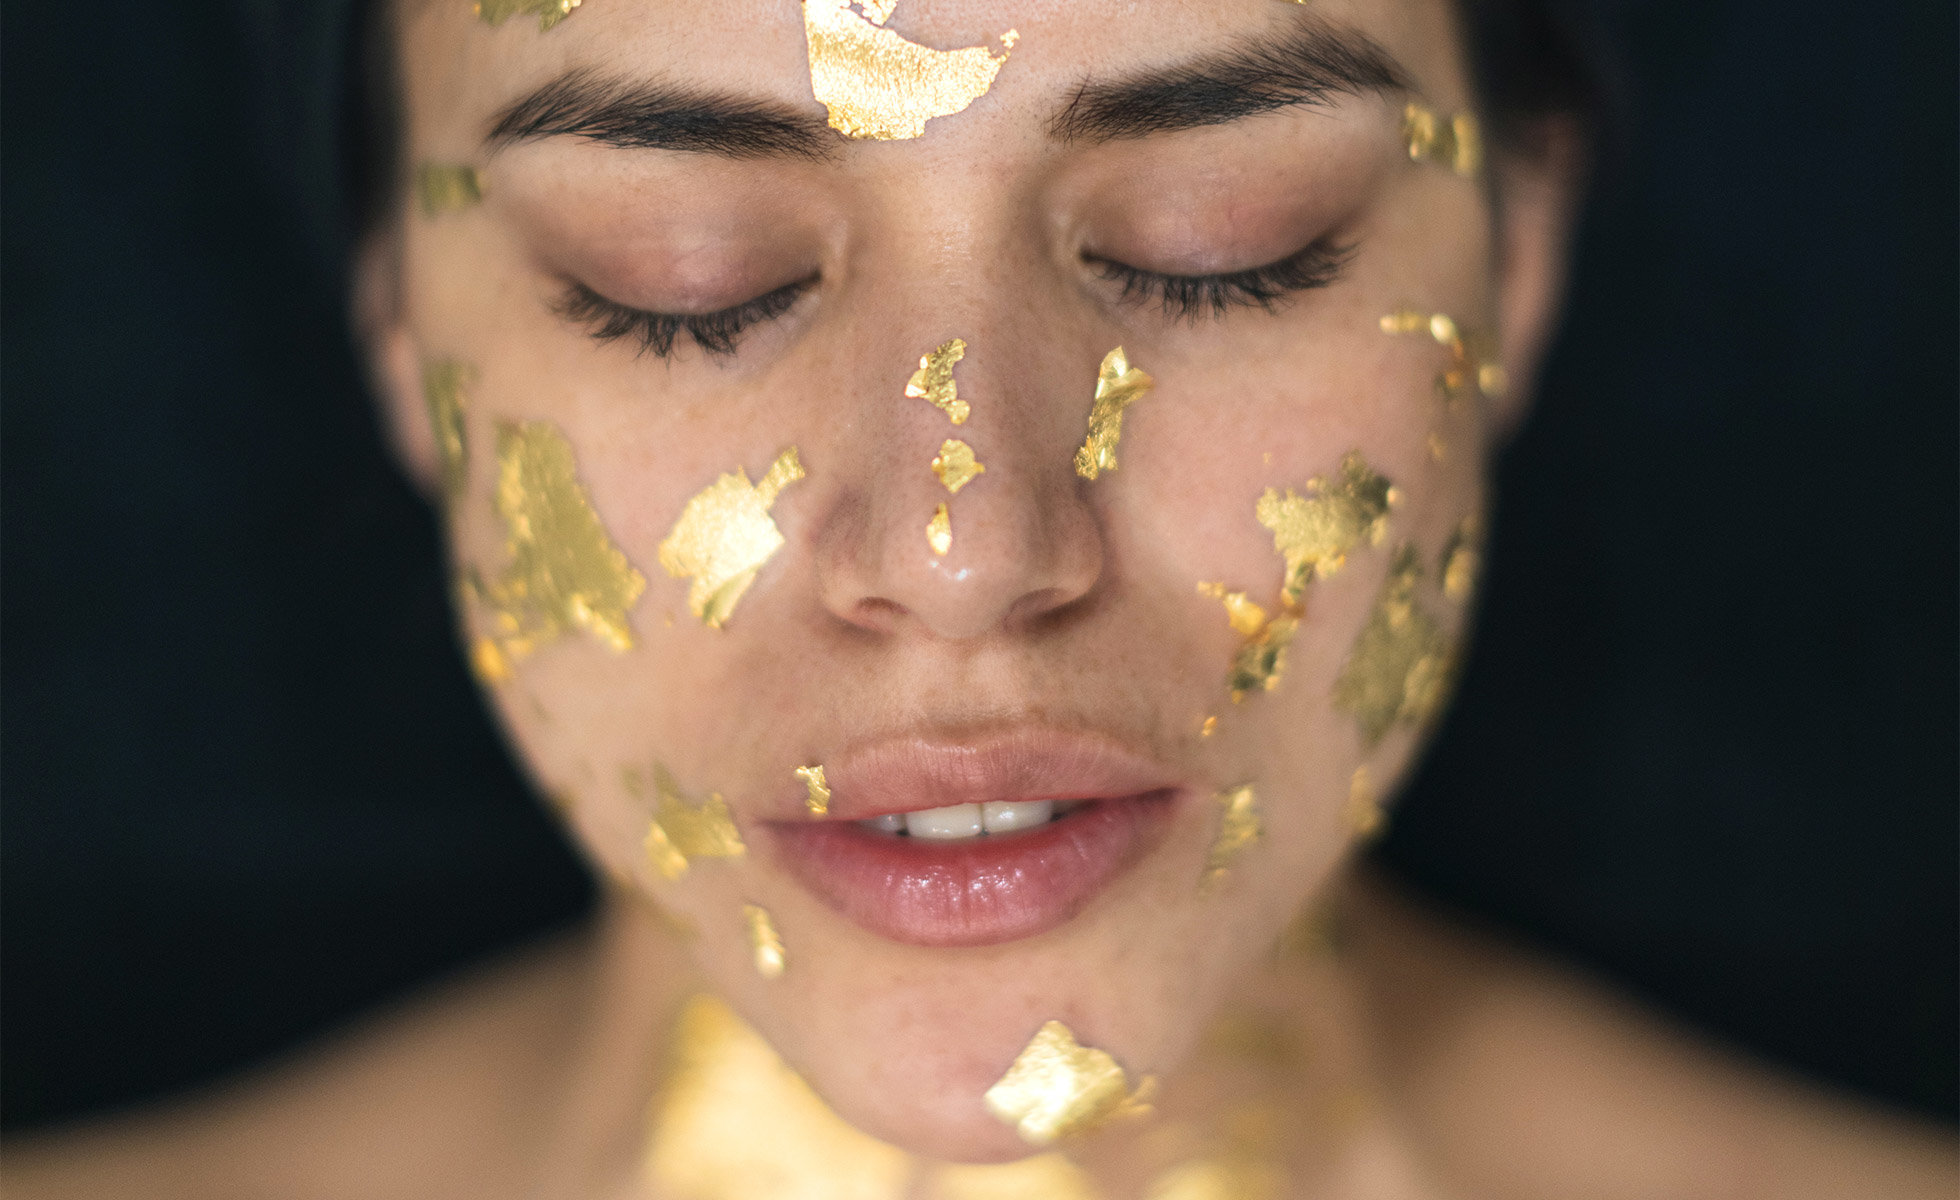 Find out what gold is and how to use it in skincare.